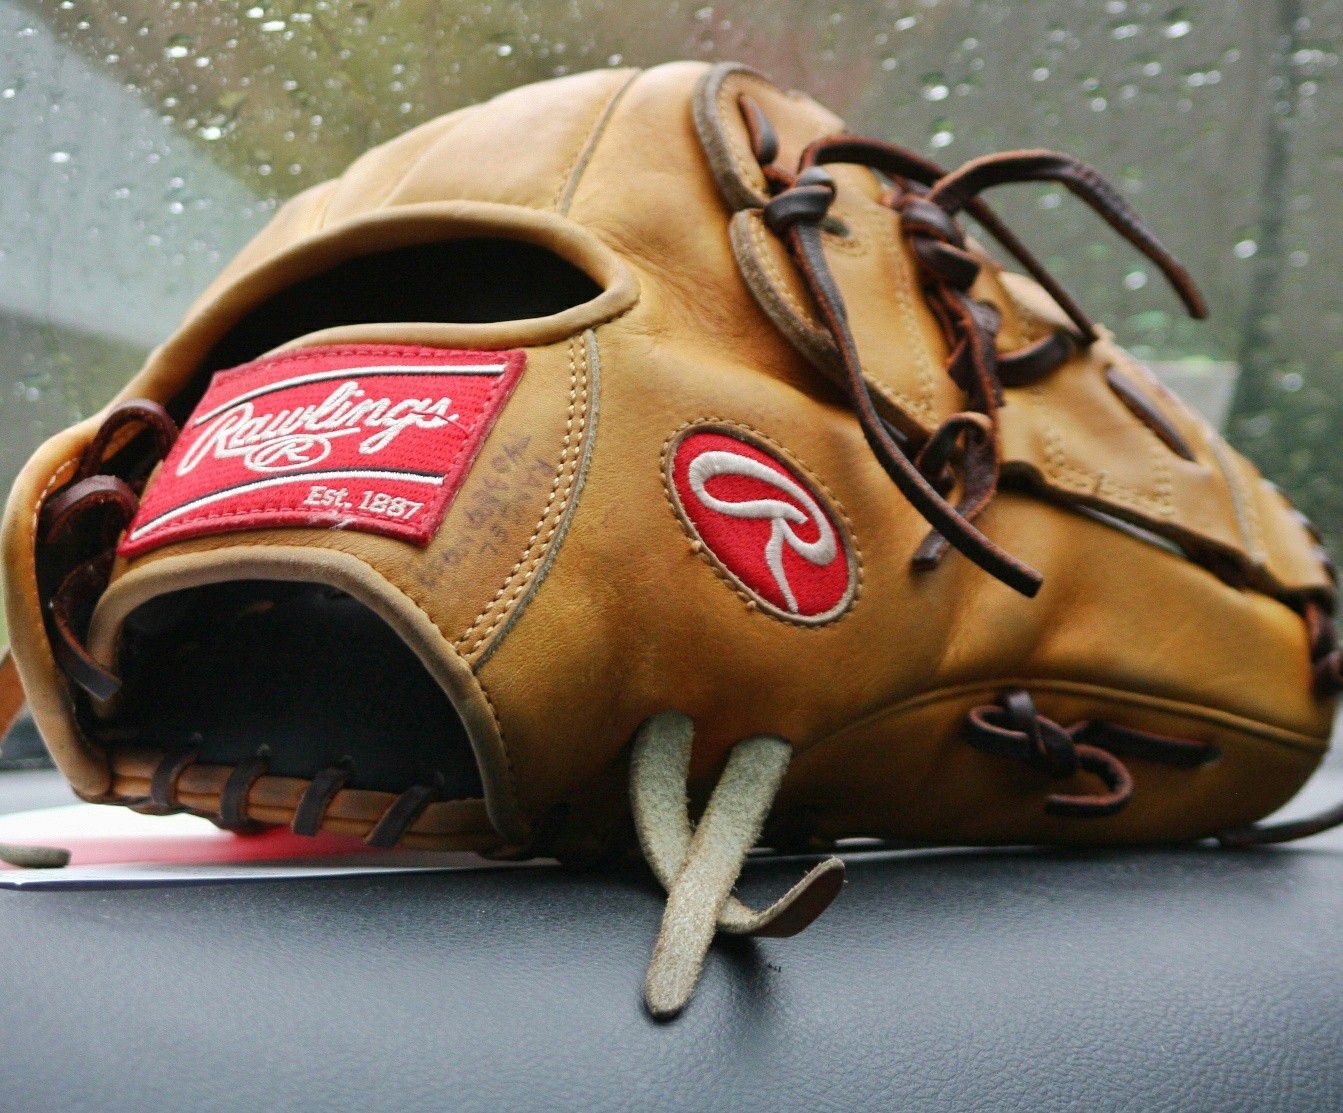 Exquisite leather Rawlings 11.75" baseball glove